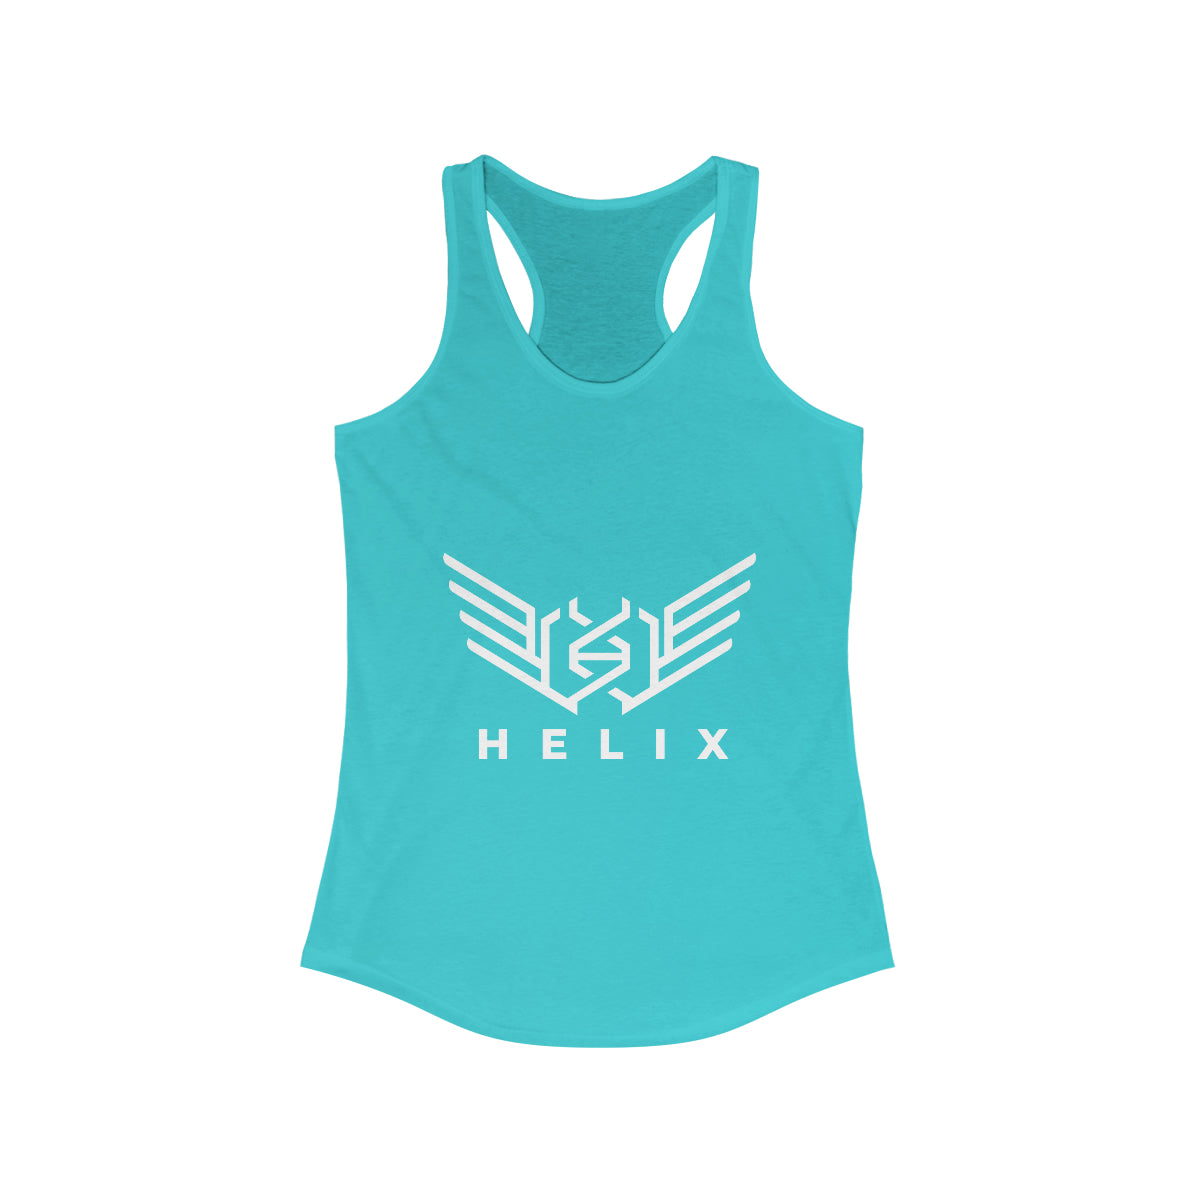 Age Of The Auto Games: Women's Racerback Helix Tank Top